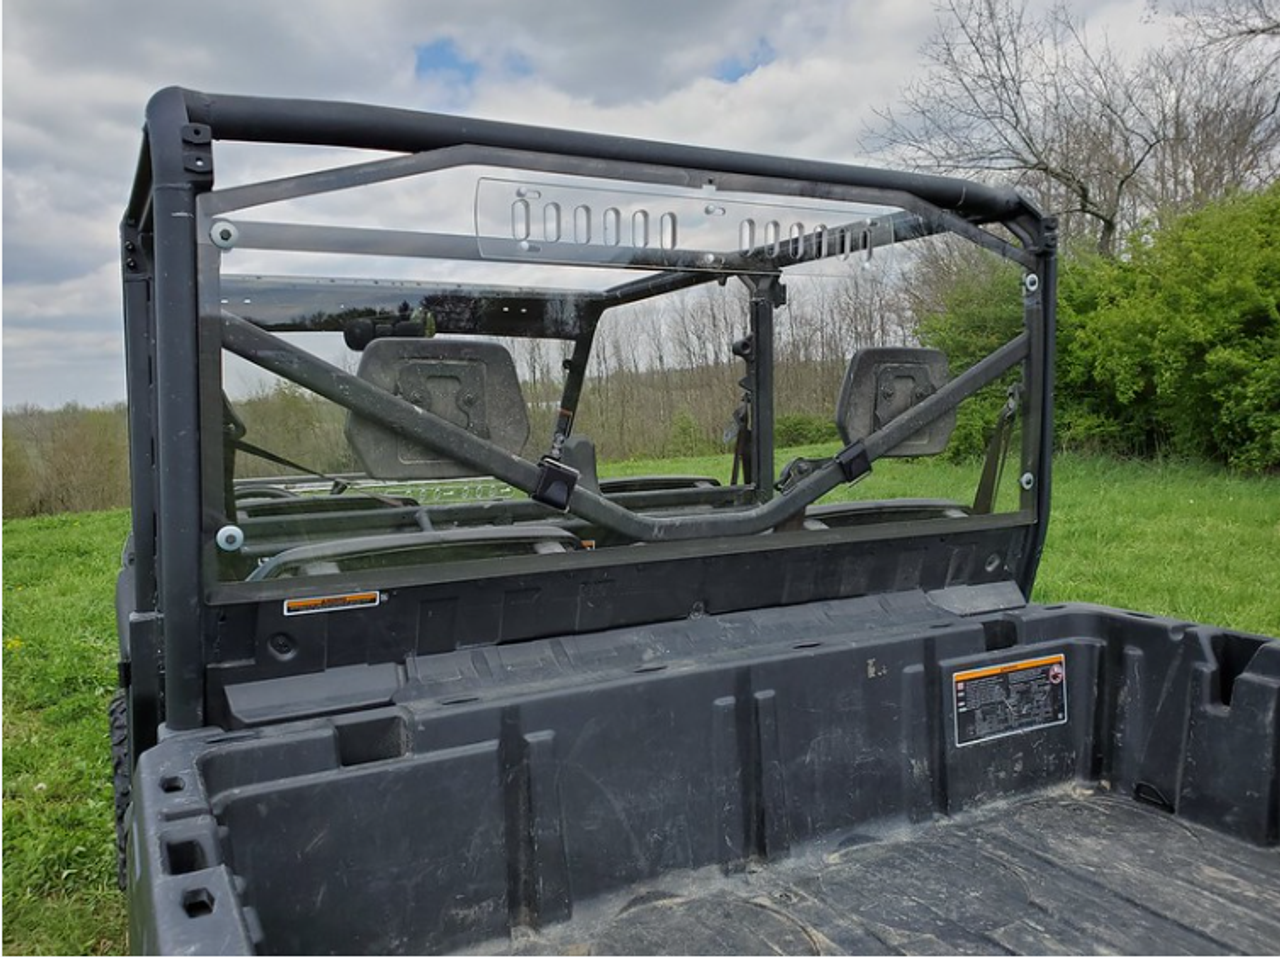 3 Star side x side can-am defender max lexan rear window rear angle view